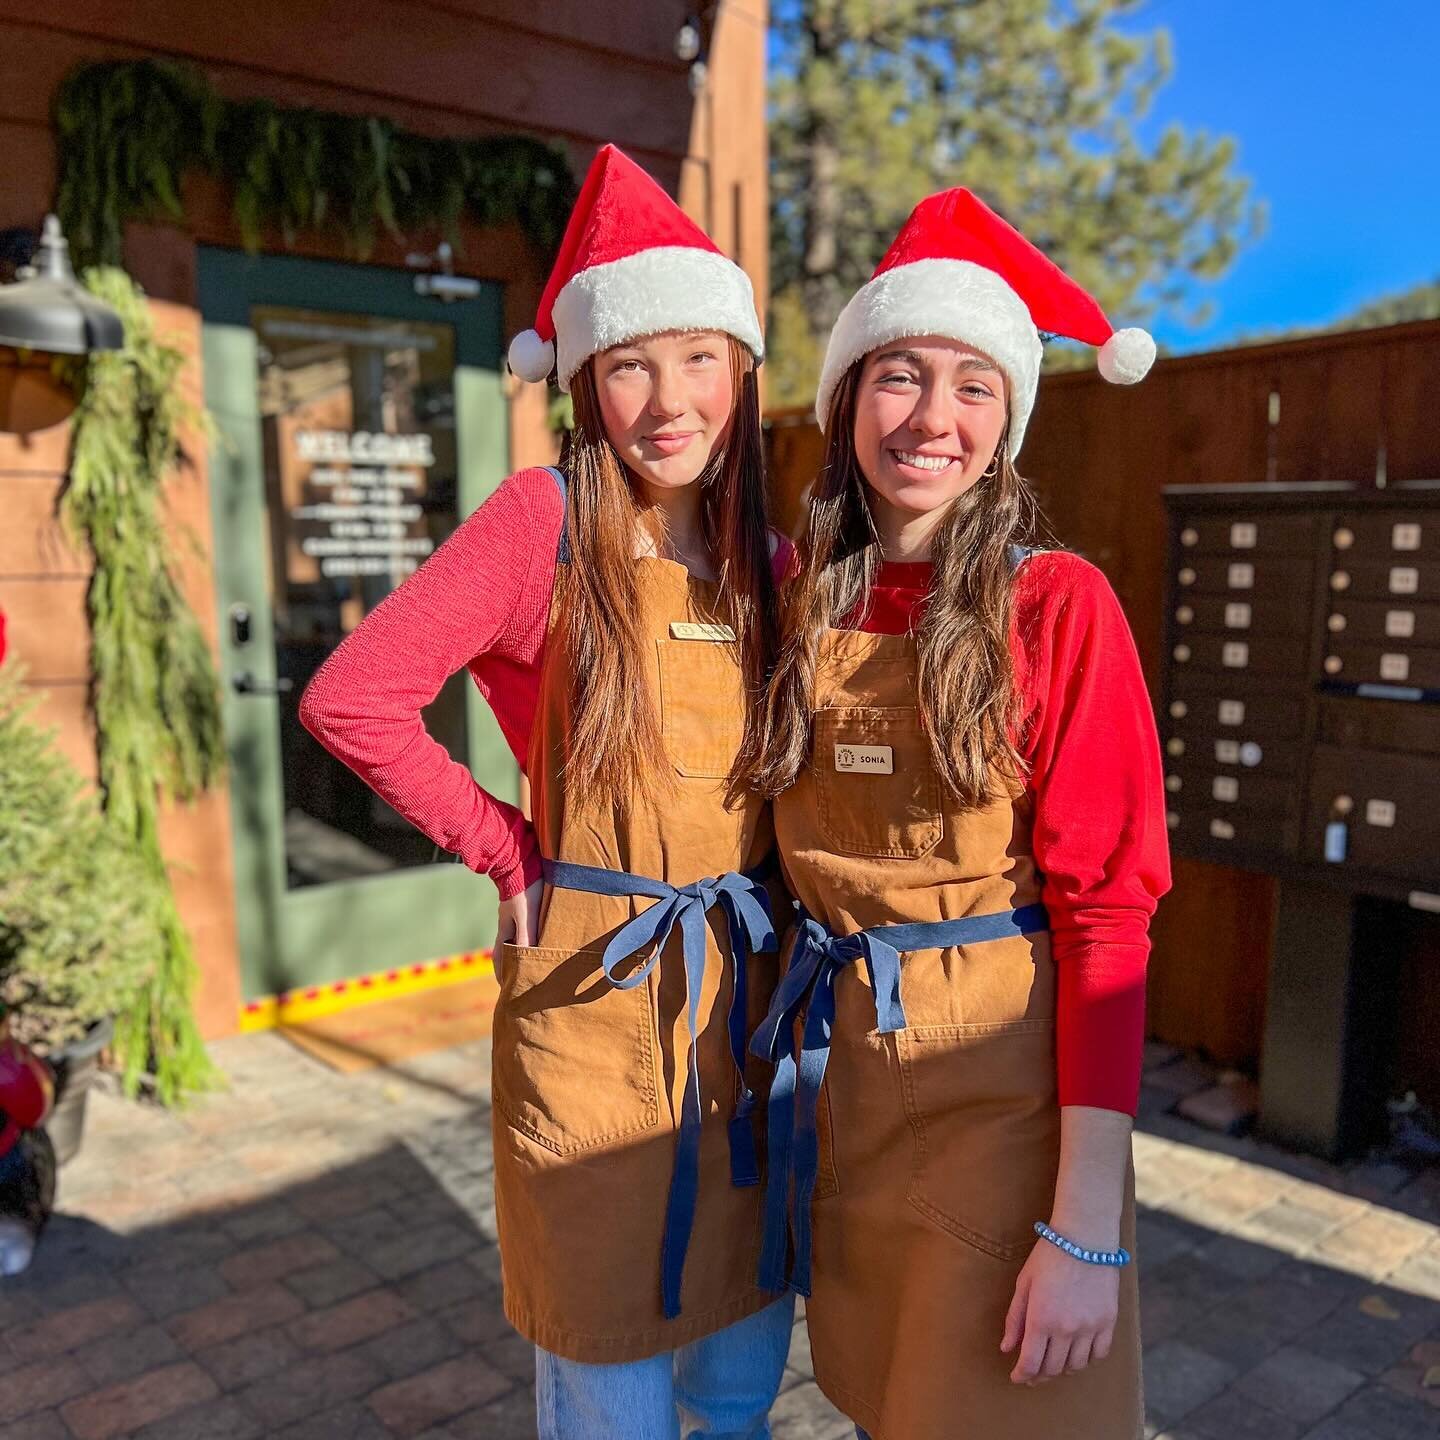 ✨ A Very Merry Creamery Christmas ✨

Join us today for a fun + festive day! 🎄 Santa + Mrs. Claus will be here at the shop from 2 PM to 4 PM and we&rsquo;re scooping all of your favorite holiday flavors! 🍦